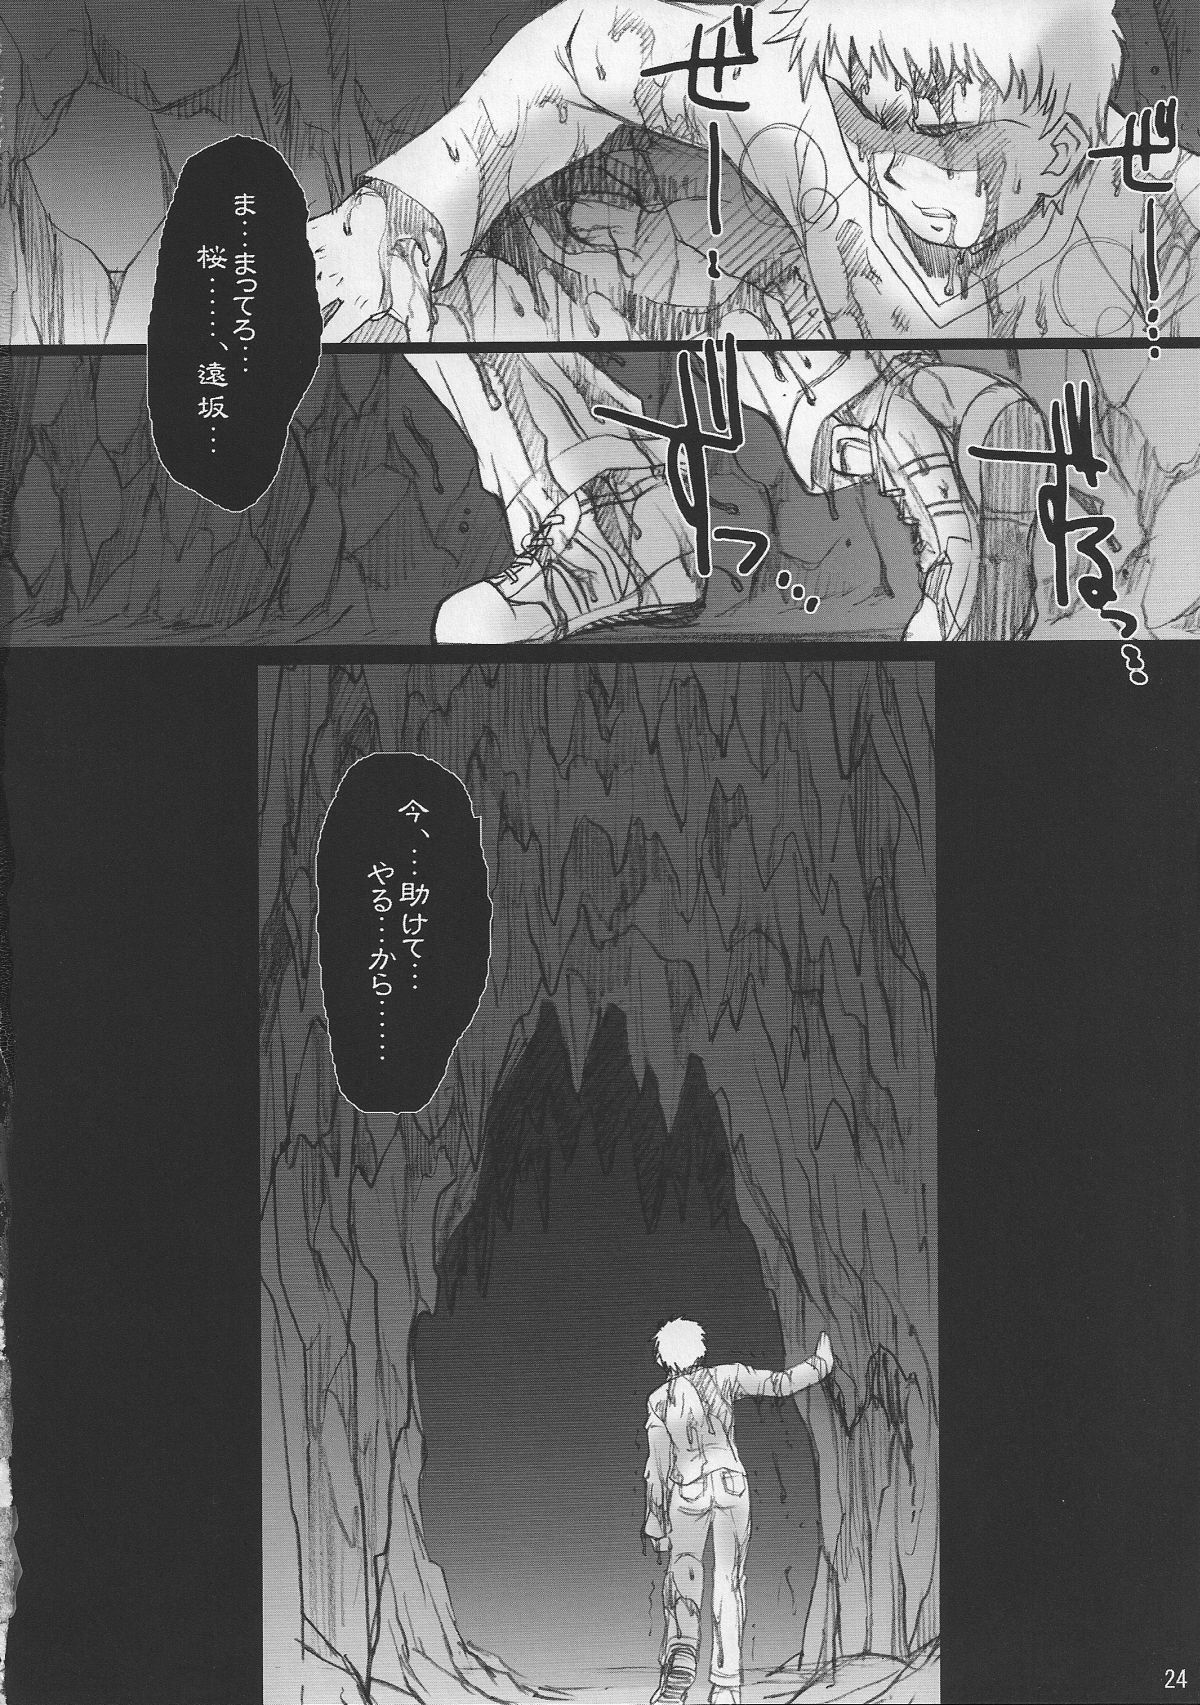 (COMIC1☆2) [H.B (B-RIVER)] Red Degeneration -DAY/3- (Fate/stay night) page 23 full